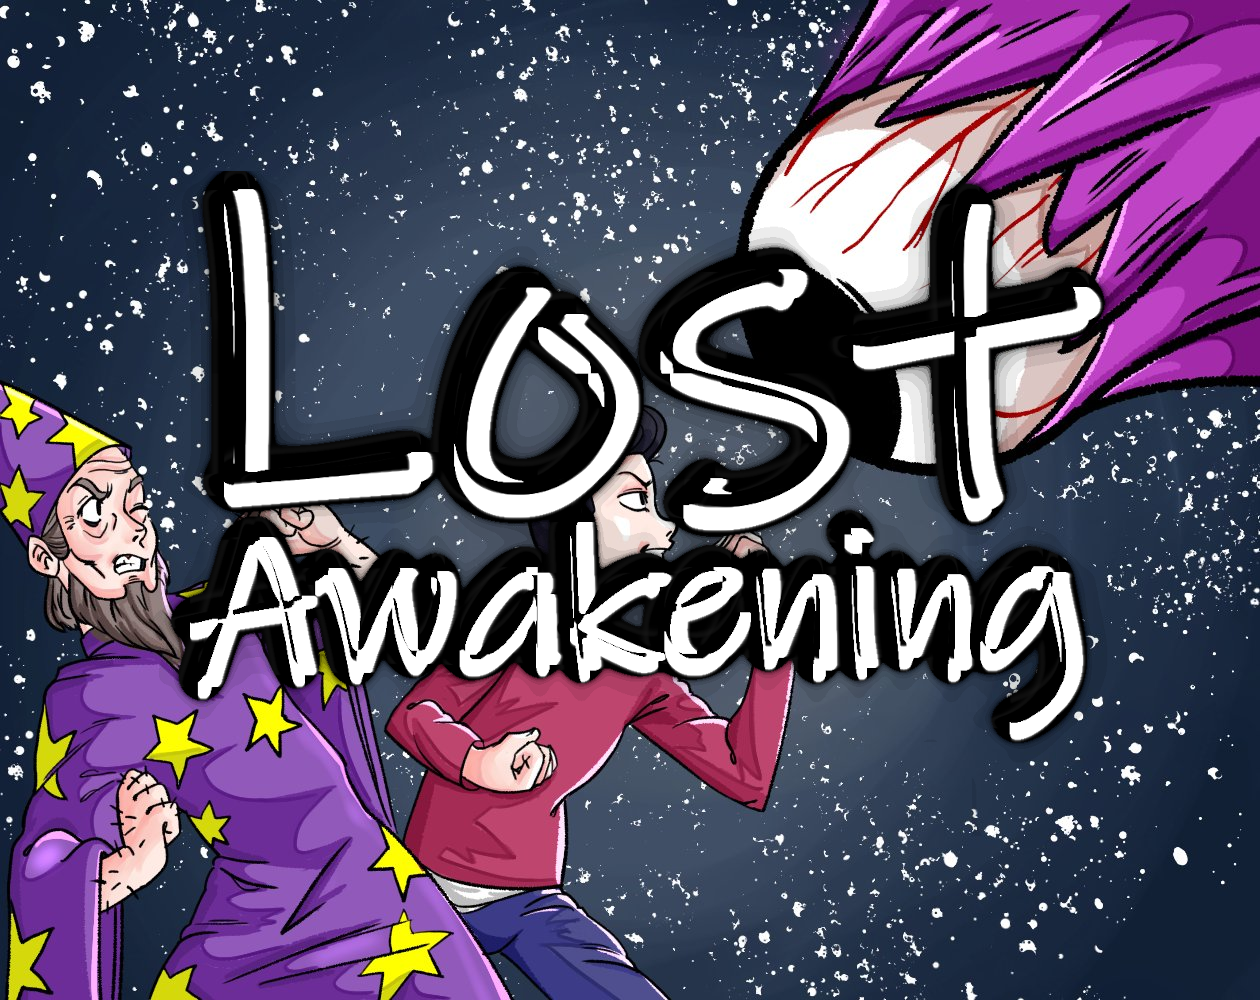 lost-awakening-is-officially-released-lost-awakening-by-hambug-games